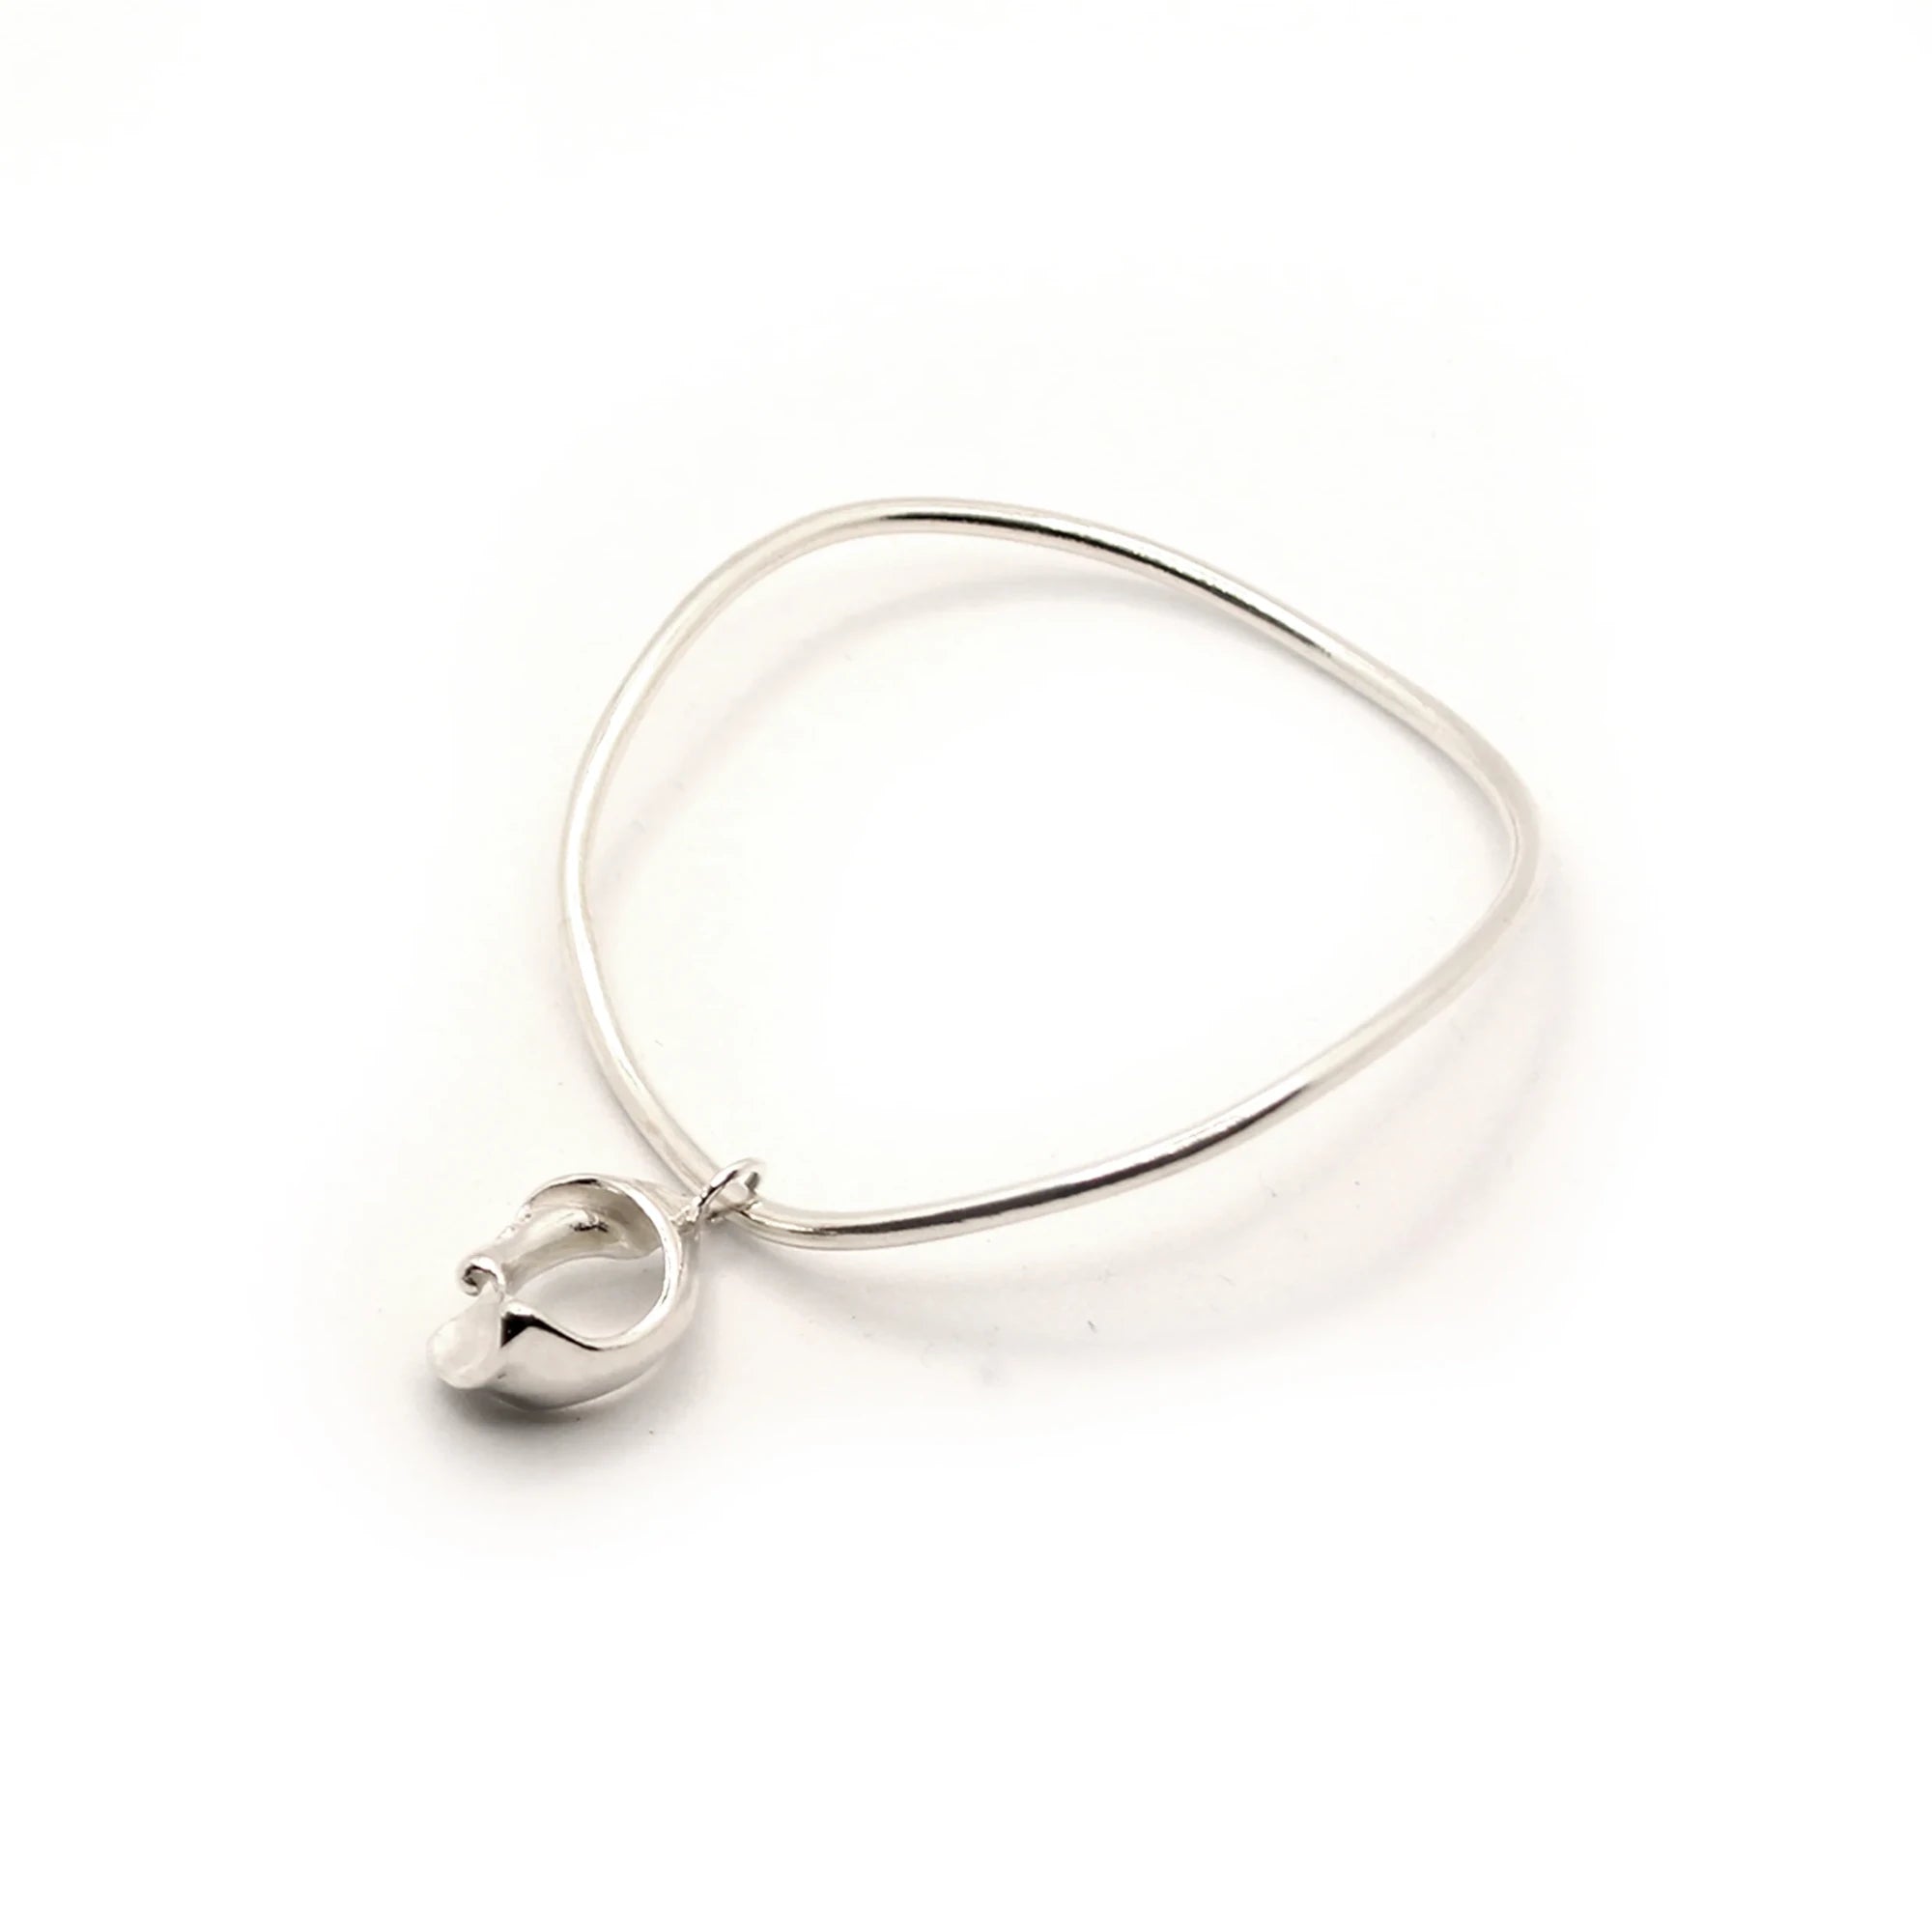 Smooth Fragmented Shell Bangle in Silver by Hannah Bourn